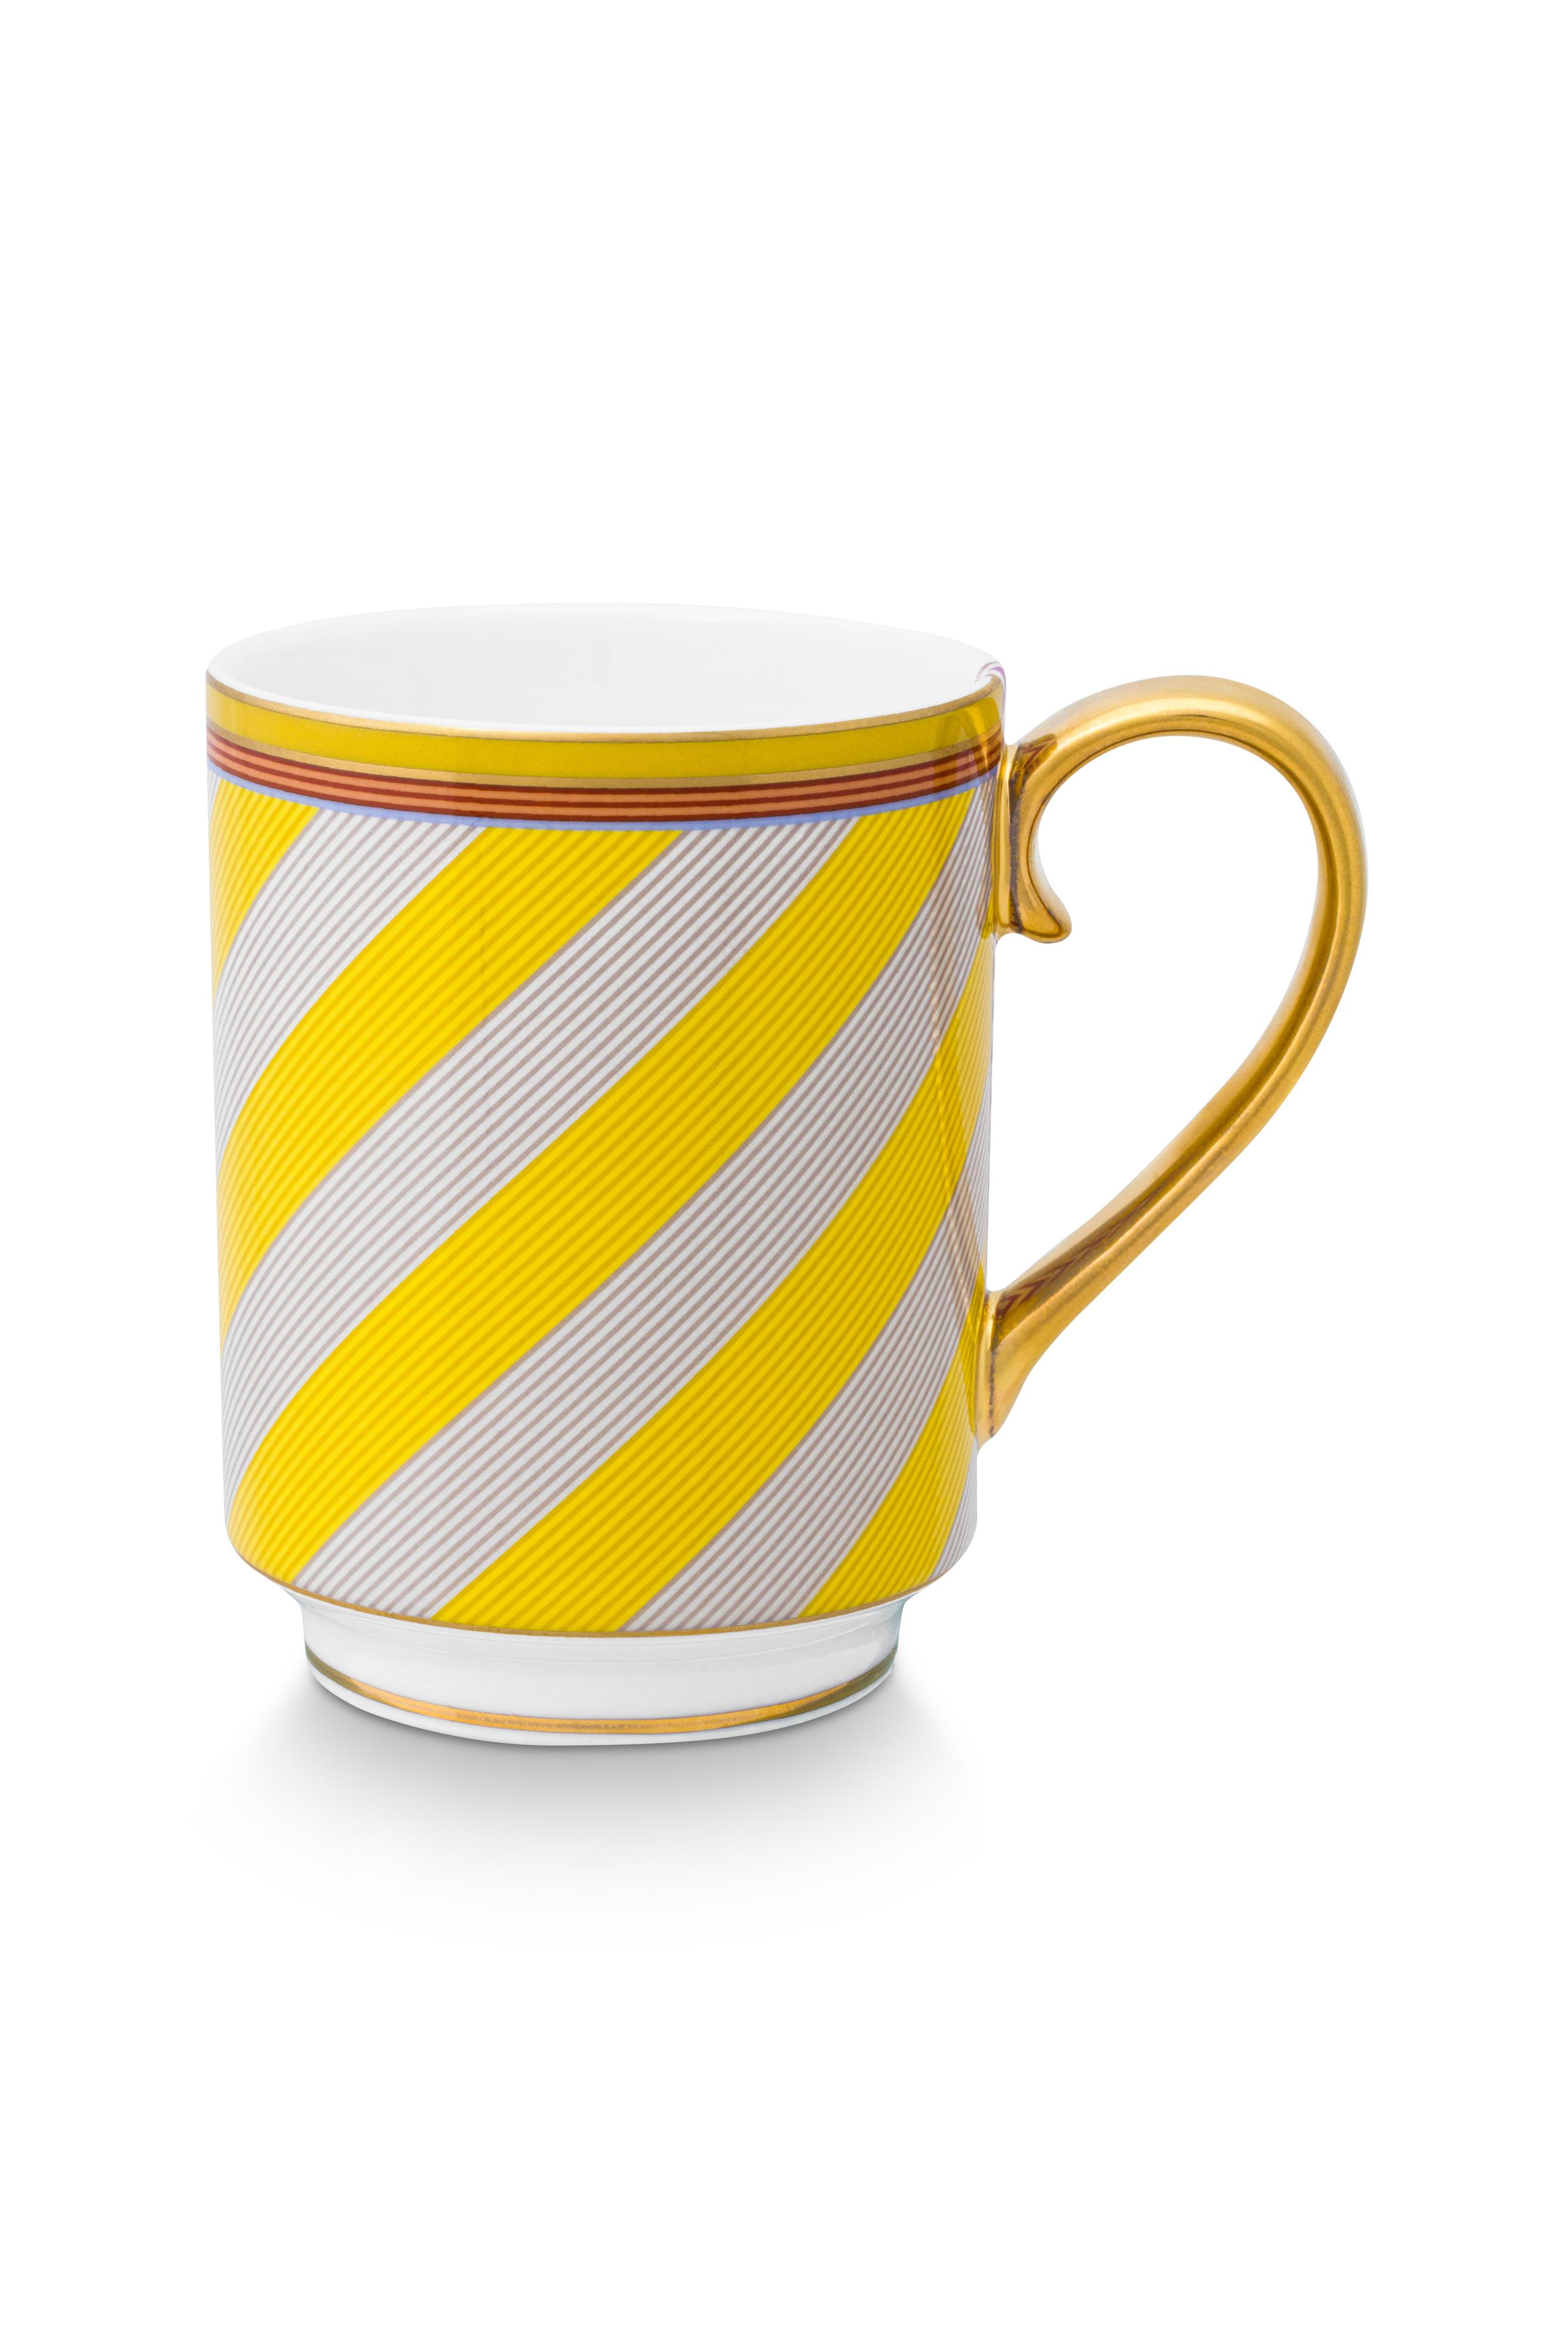 Mug Large With Ear Pip Chique Stripes Yellow 350ml Gift